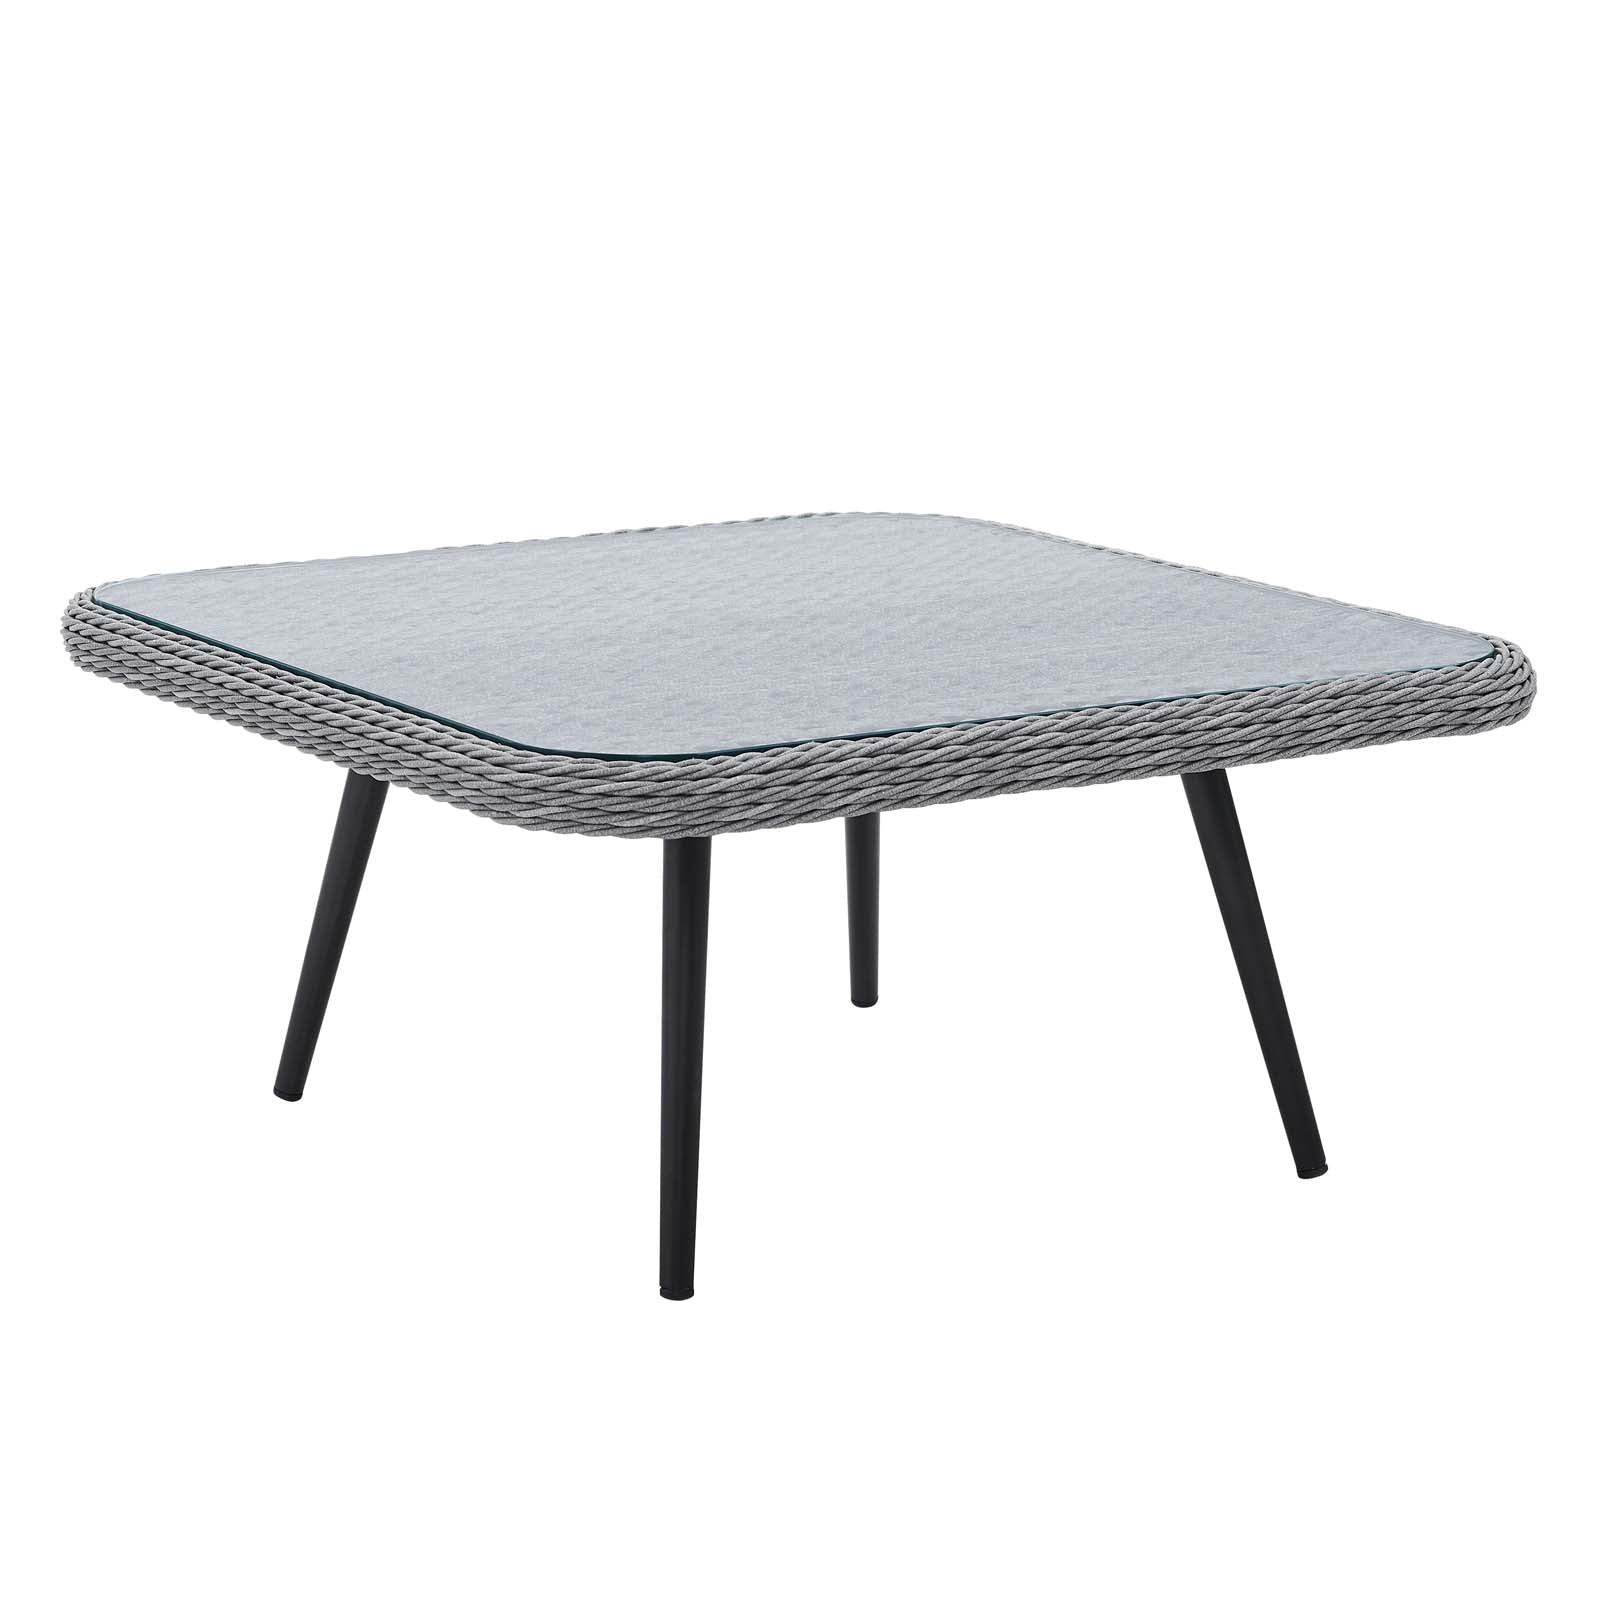 Endeavor Outdoor Patio Wicker Rattan Square Coffee Table - East Shore Modern Home Furnishings